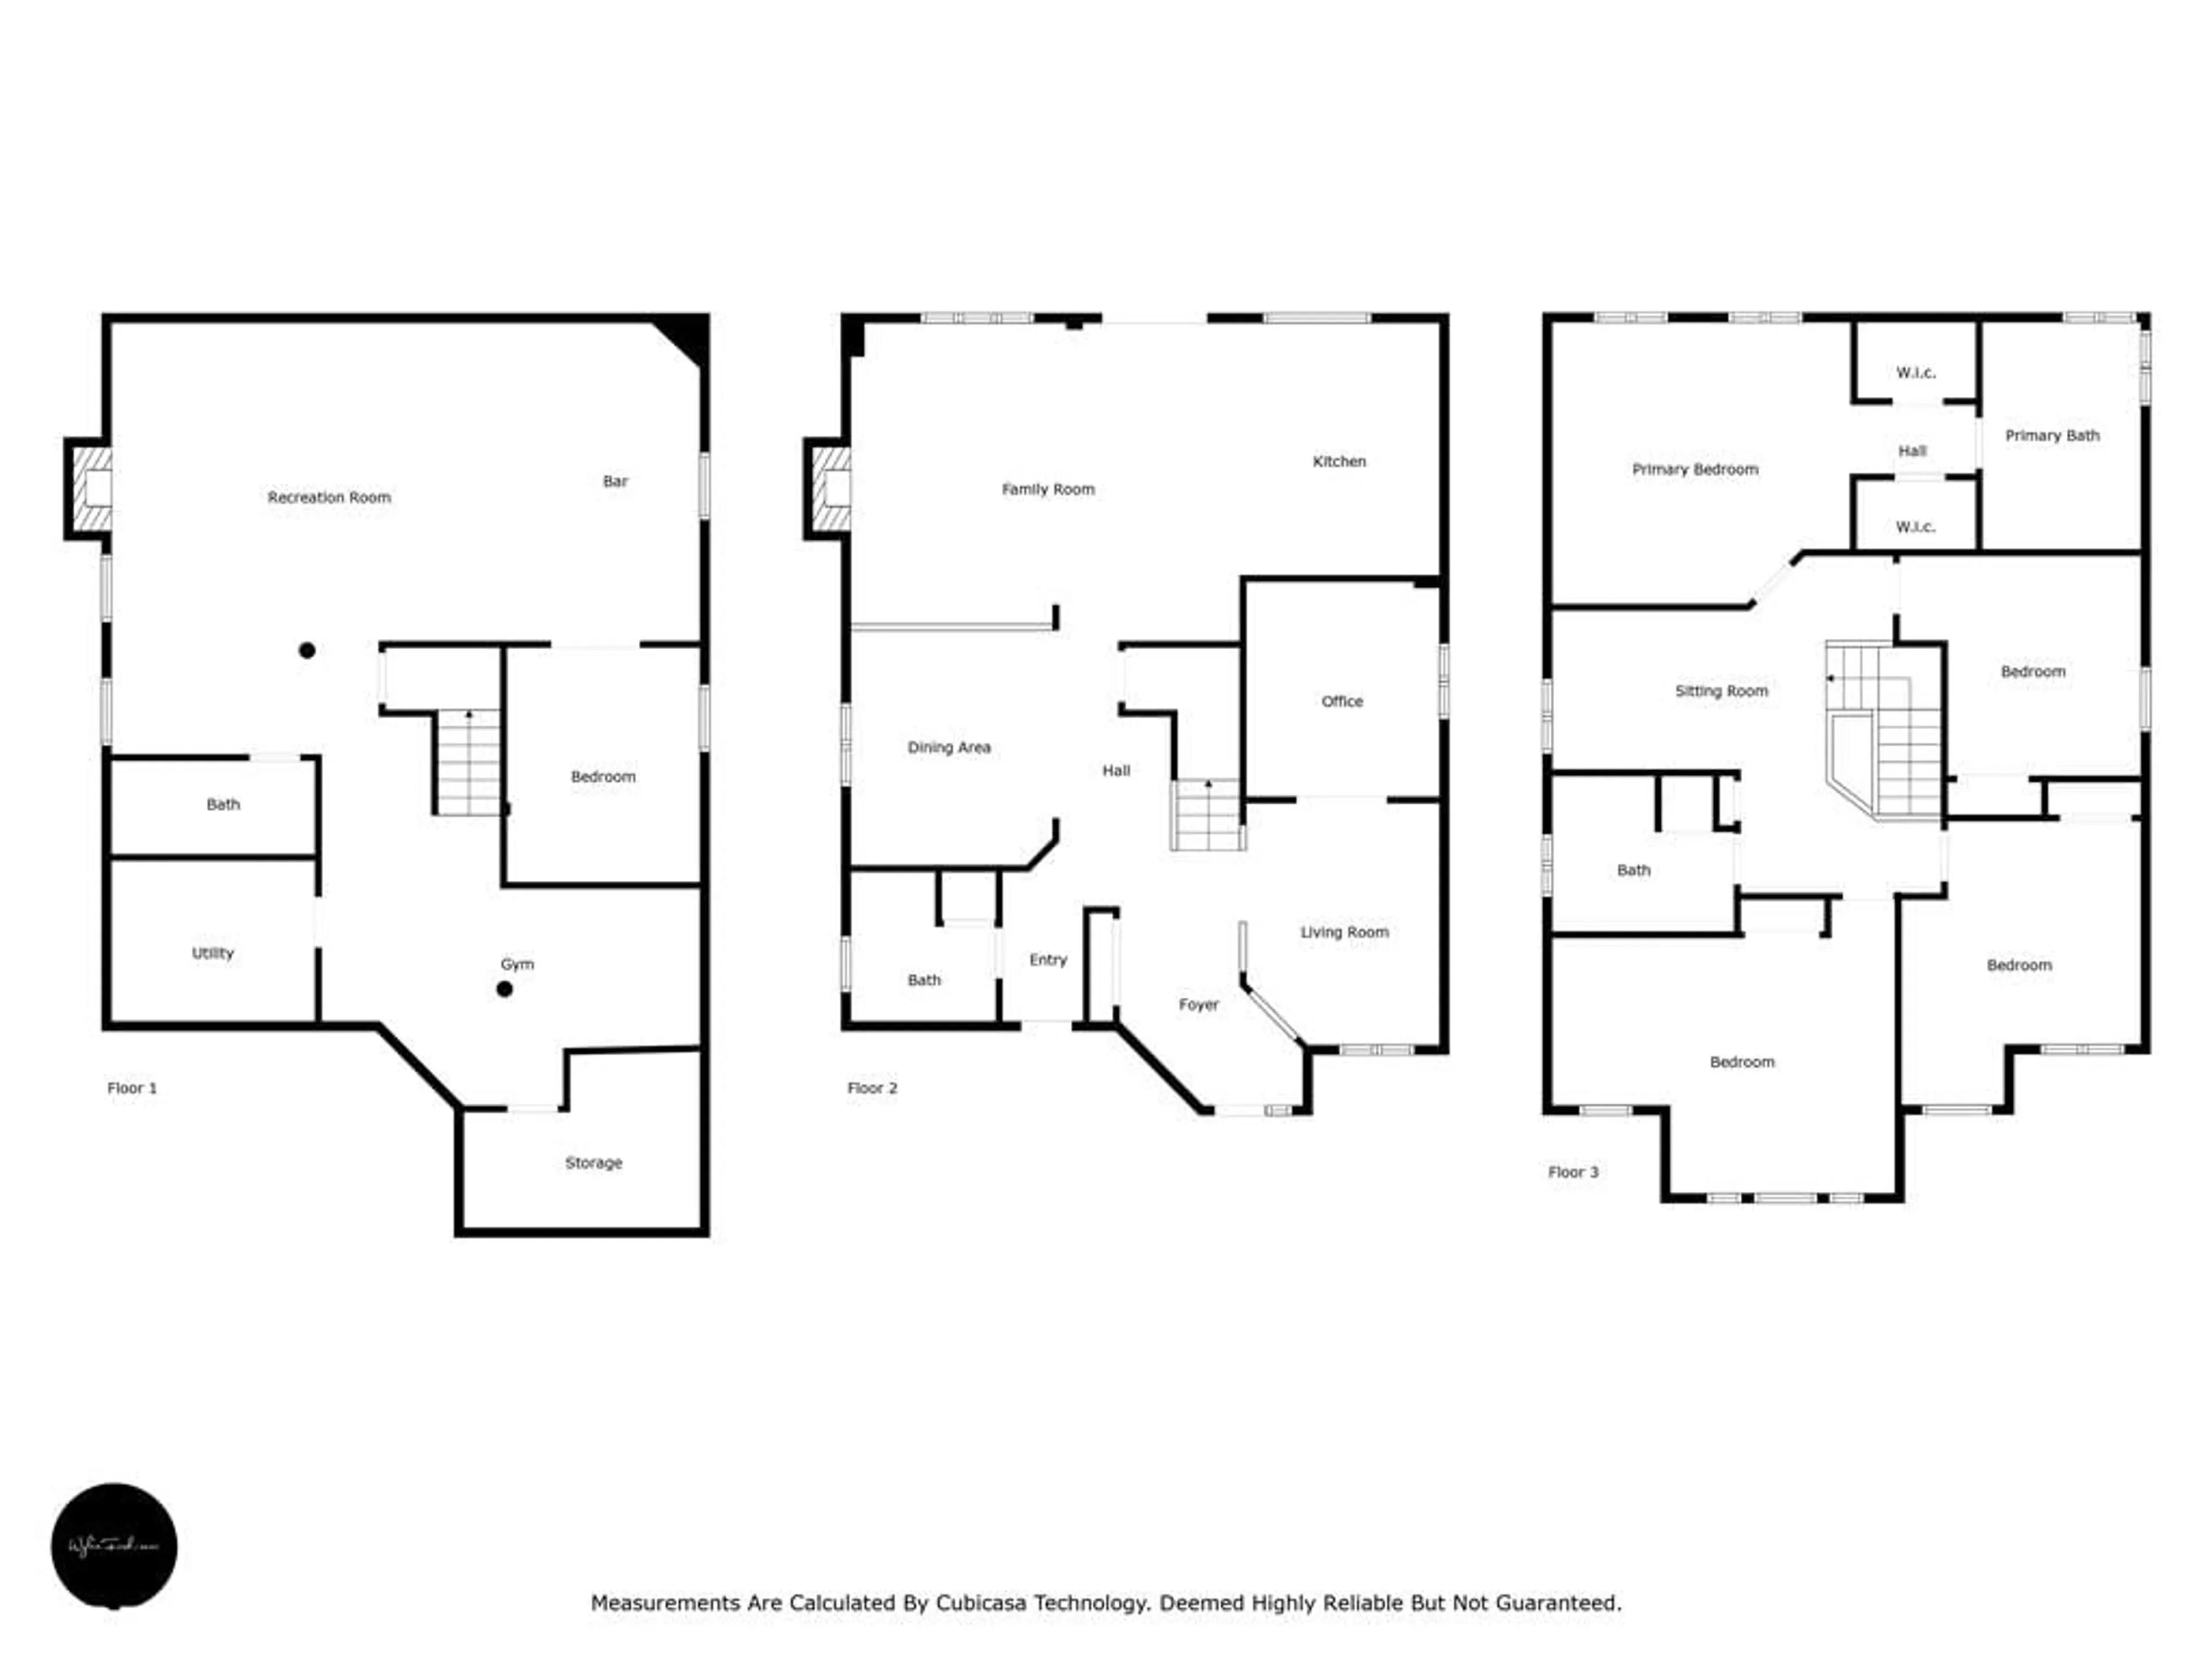 Floor plan for 920 Booth Ave, Innisfil Ontario L9S 0A5